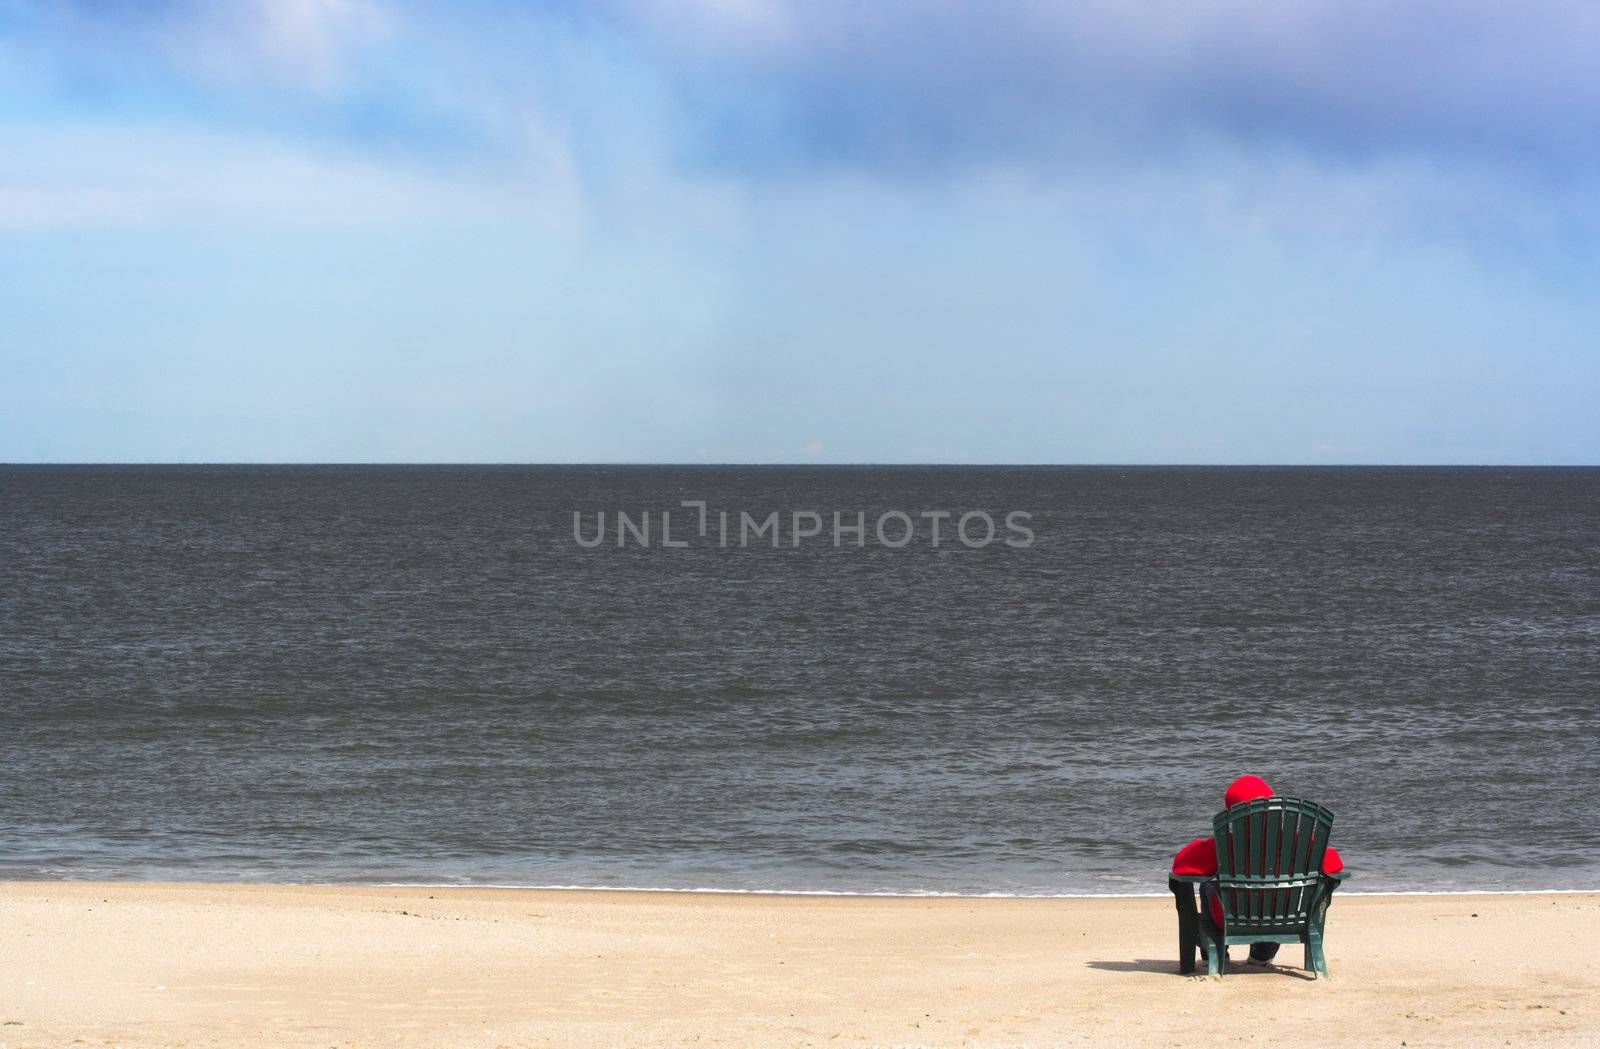 A young person in a hooded red sweatshirt sitting alone on a chair in the sand at the beach. The hood of the sweatshirt is on indicating it is a chilly day. The person is looking out over the ocean.